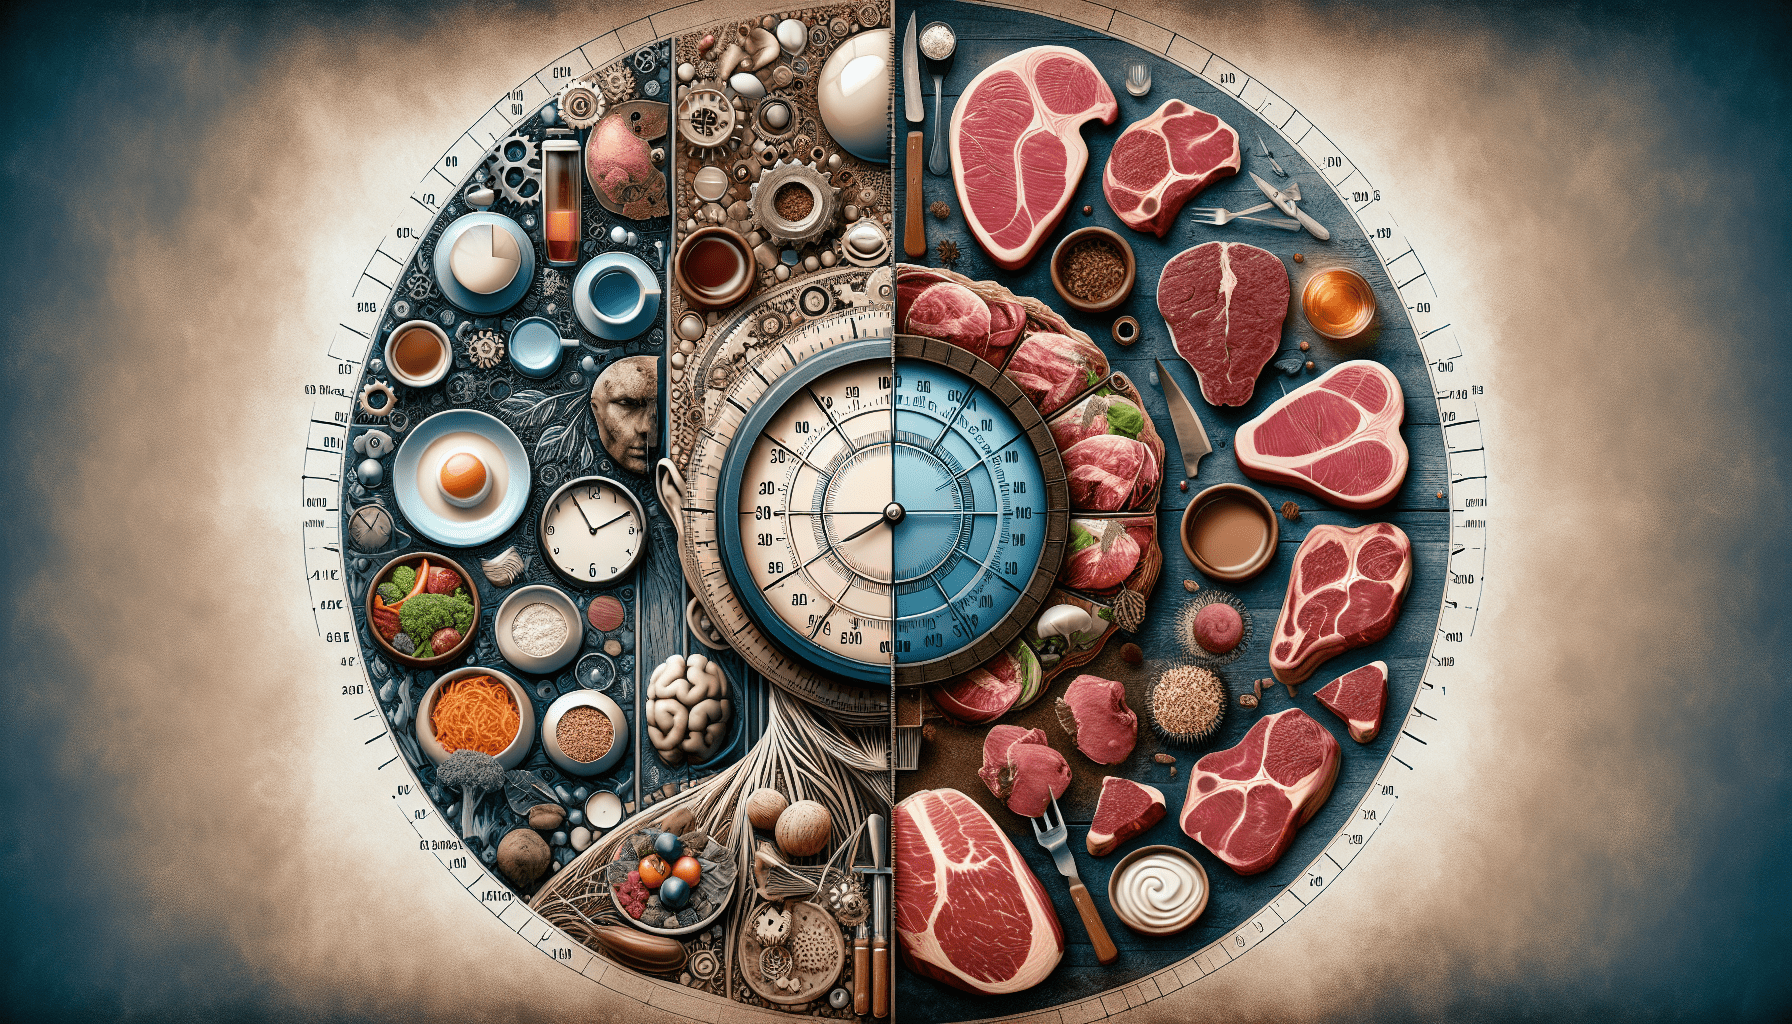 The Ultimate Guide to Intermittent Fasting on the Carnivore Diet